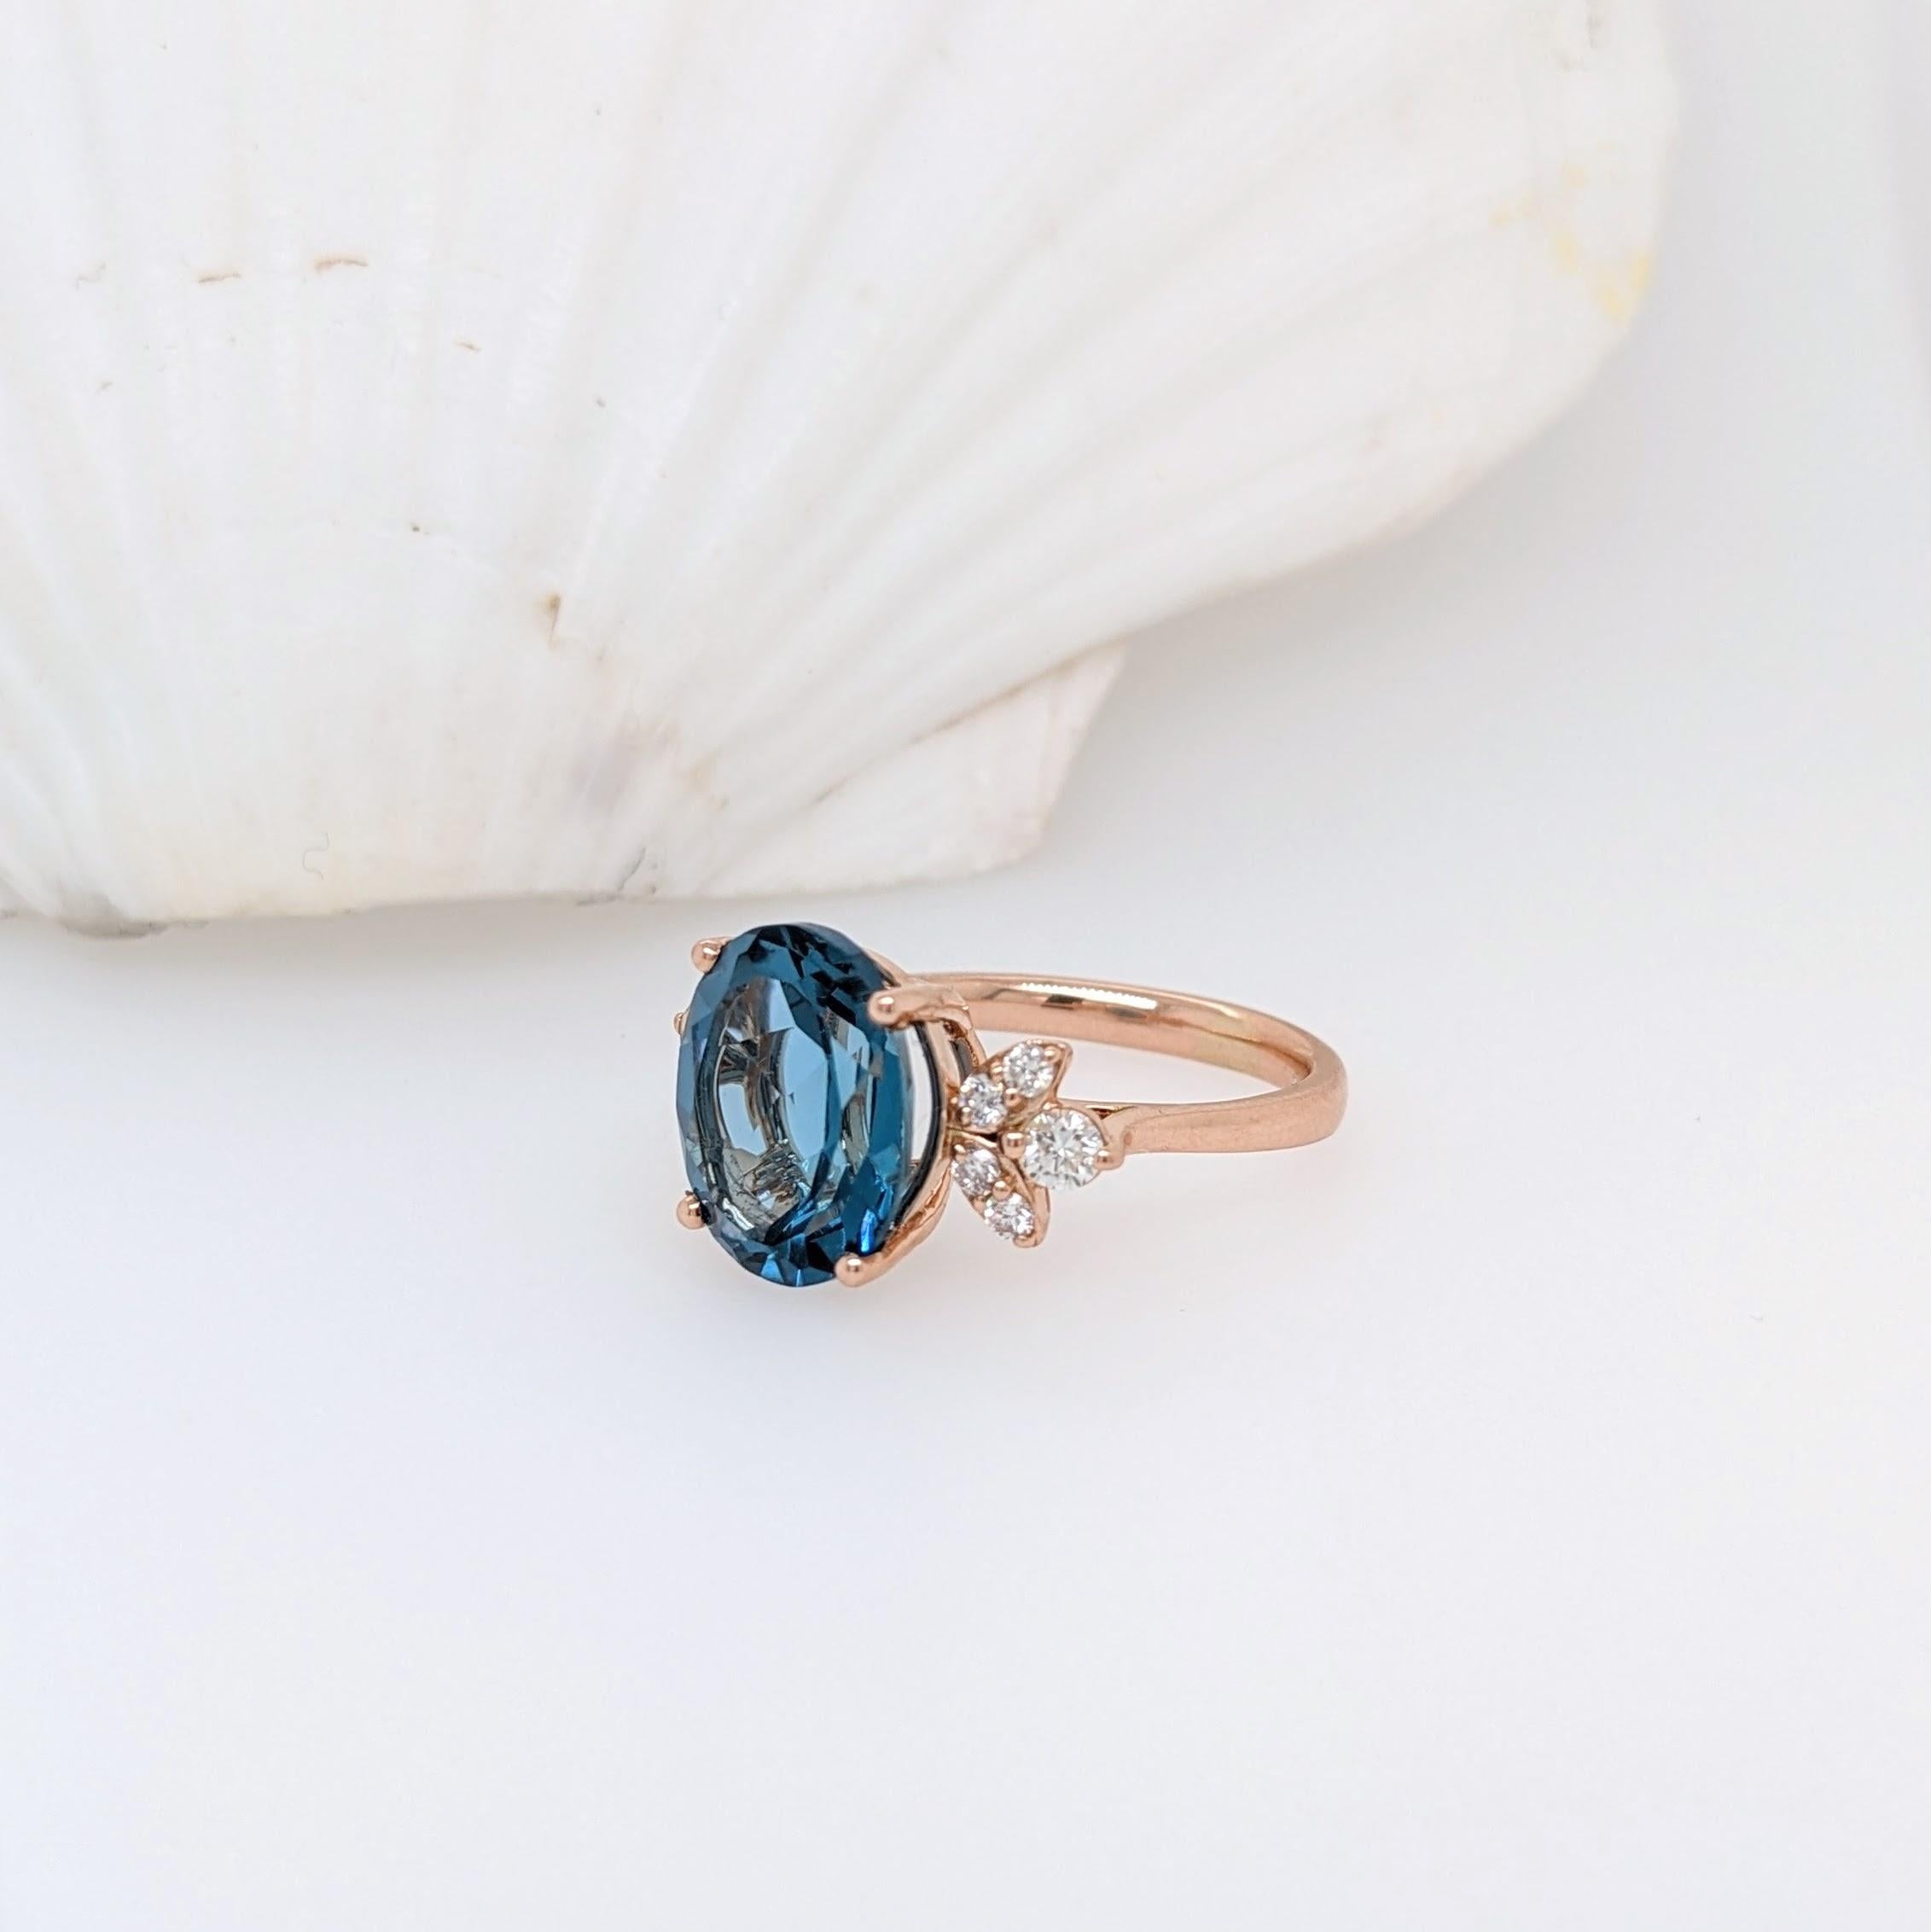 This piece features a gorgeous blue topaz with natural diamond accents in 14k rose gold. A beautiful nature themed design that's works beautifully as an elegant statement piece!

We love this custom NNJ design so much that we've made a full set with